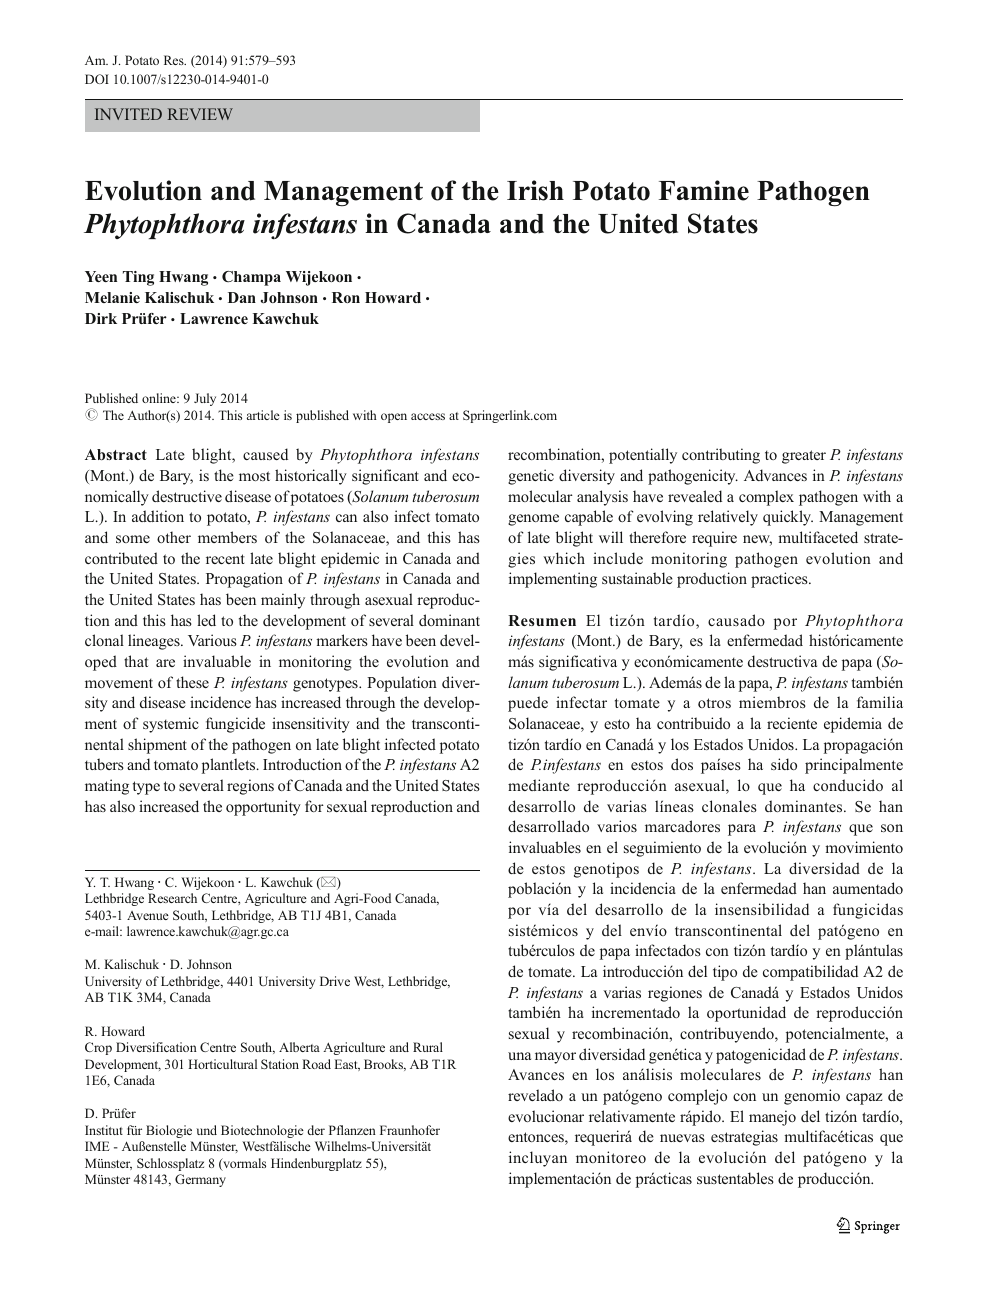 Evolution And Management Of The Irish Potato Famine Pathogen Phytophthora Infestans In Canada And The United States Topic Of Research Paper In Biological Sciences Download Scholarly Article Pdf And Read For